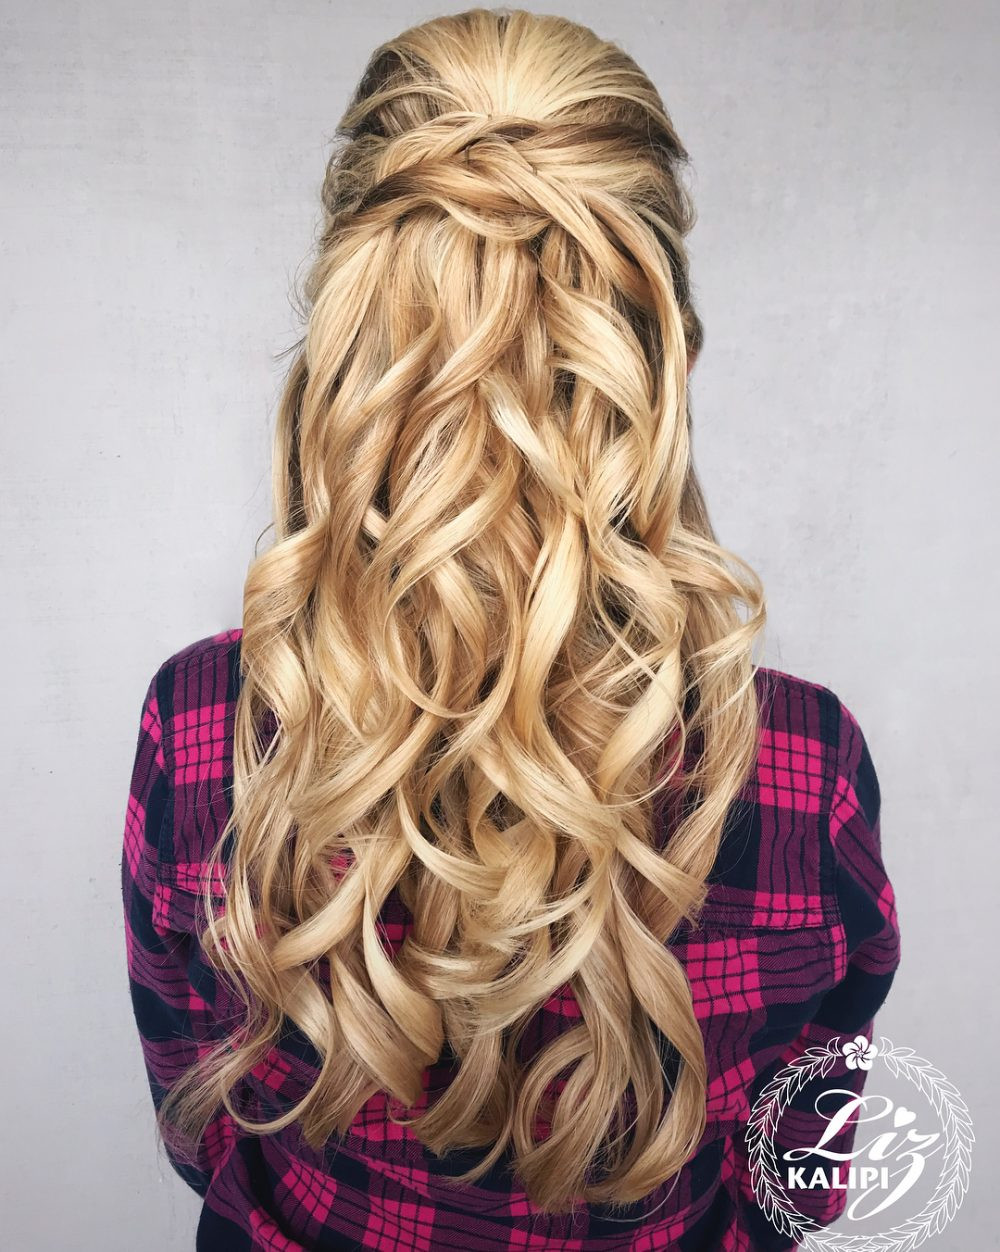 Prom Hairstyle For Long Hair
 29 Prom Hairstyles for Long Hair That Are Gorgeous